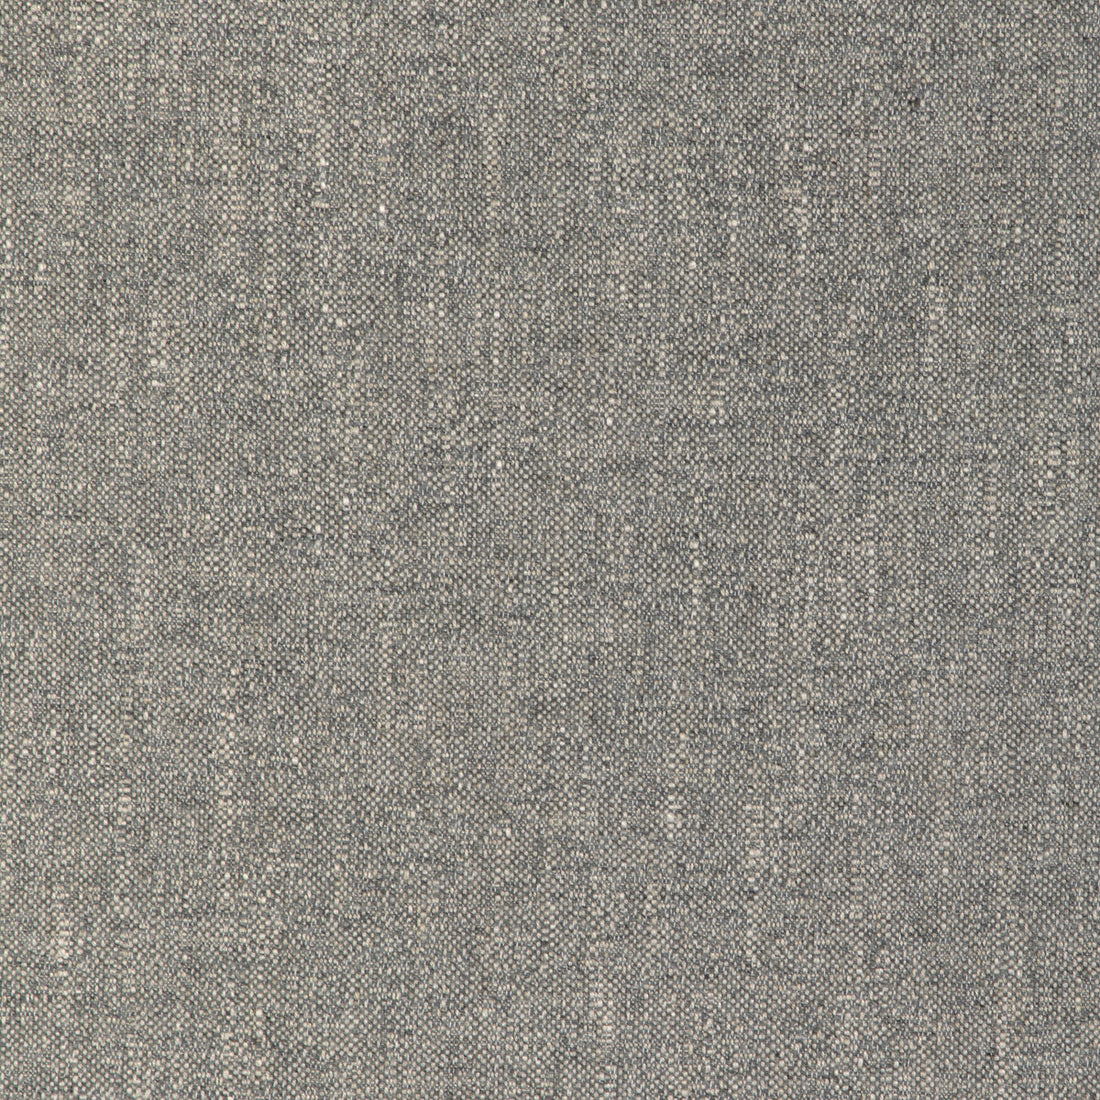 Kravet Design fabric in 36968-1101 color - pattern 36968.1101.0 - by Kravet Design in the Sustainable Textures II collection